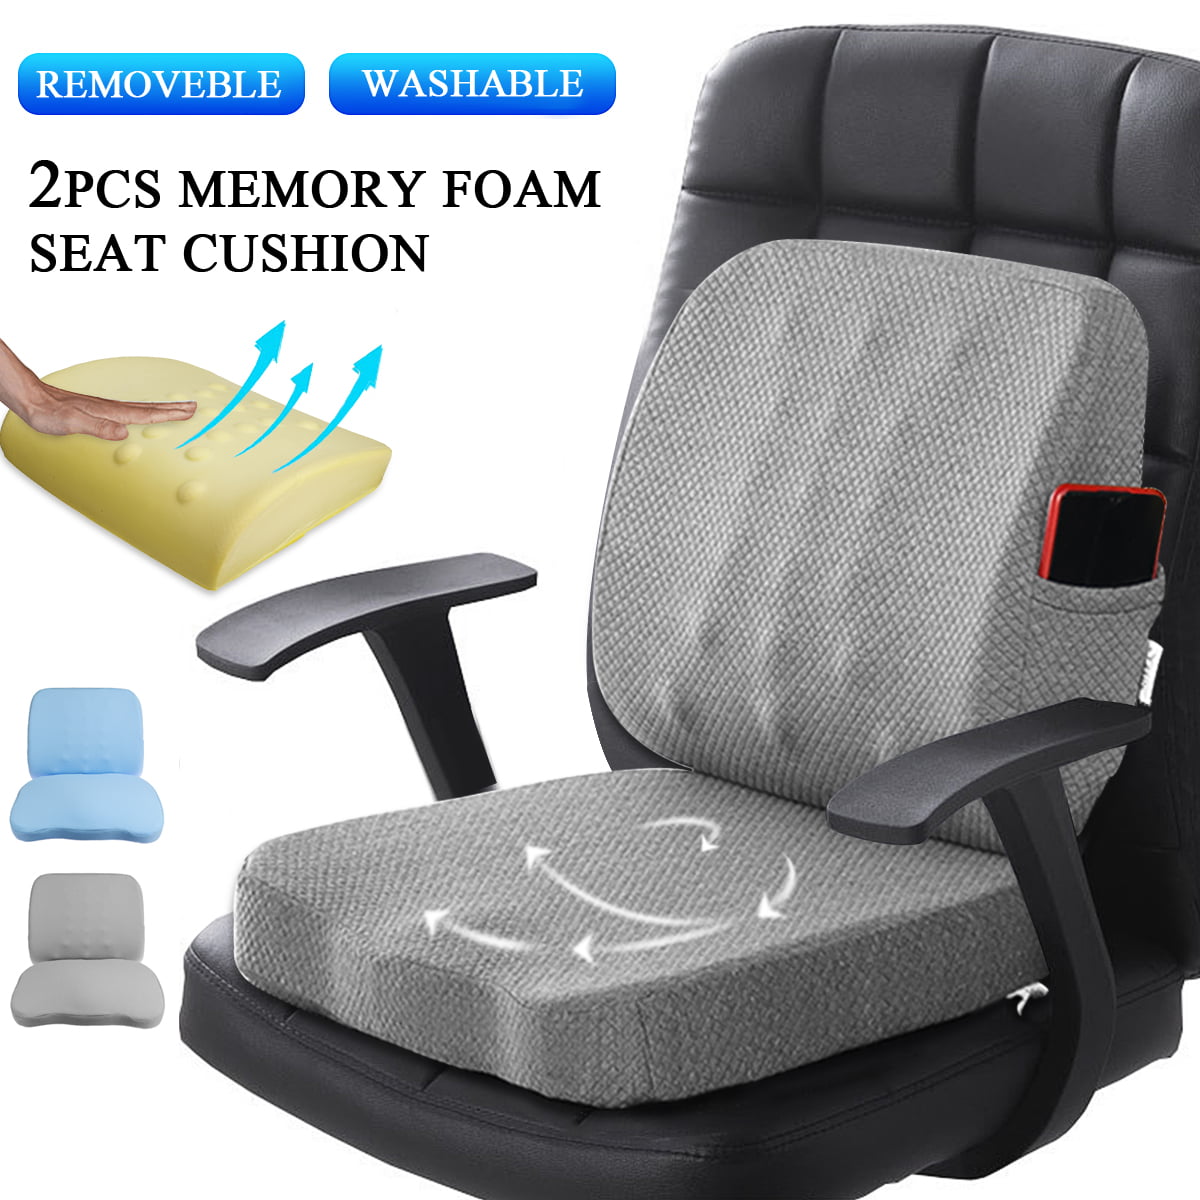 Memory Foam Seat Cushion Coccyx Support Orthopedic Pillow Office Home Chair Pads 